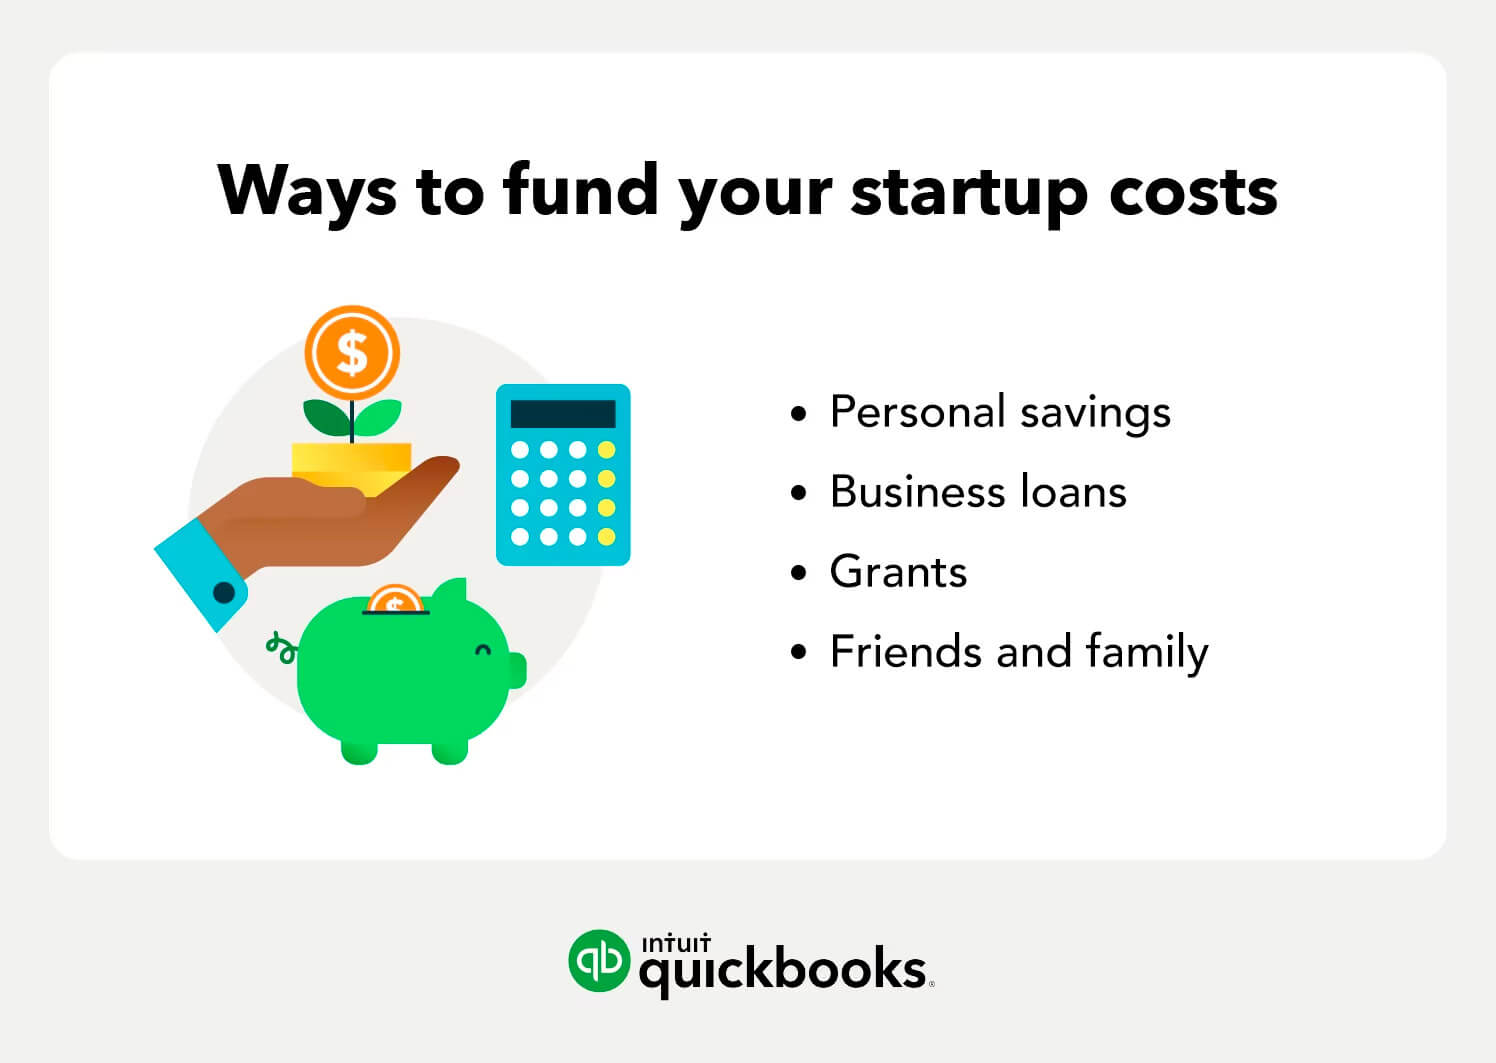 Ways to fund your startup costs infographic